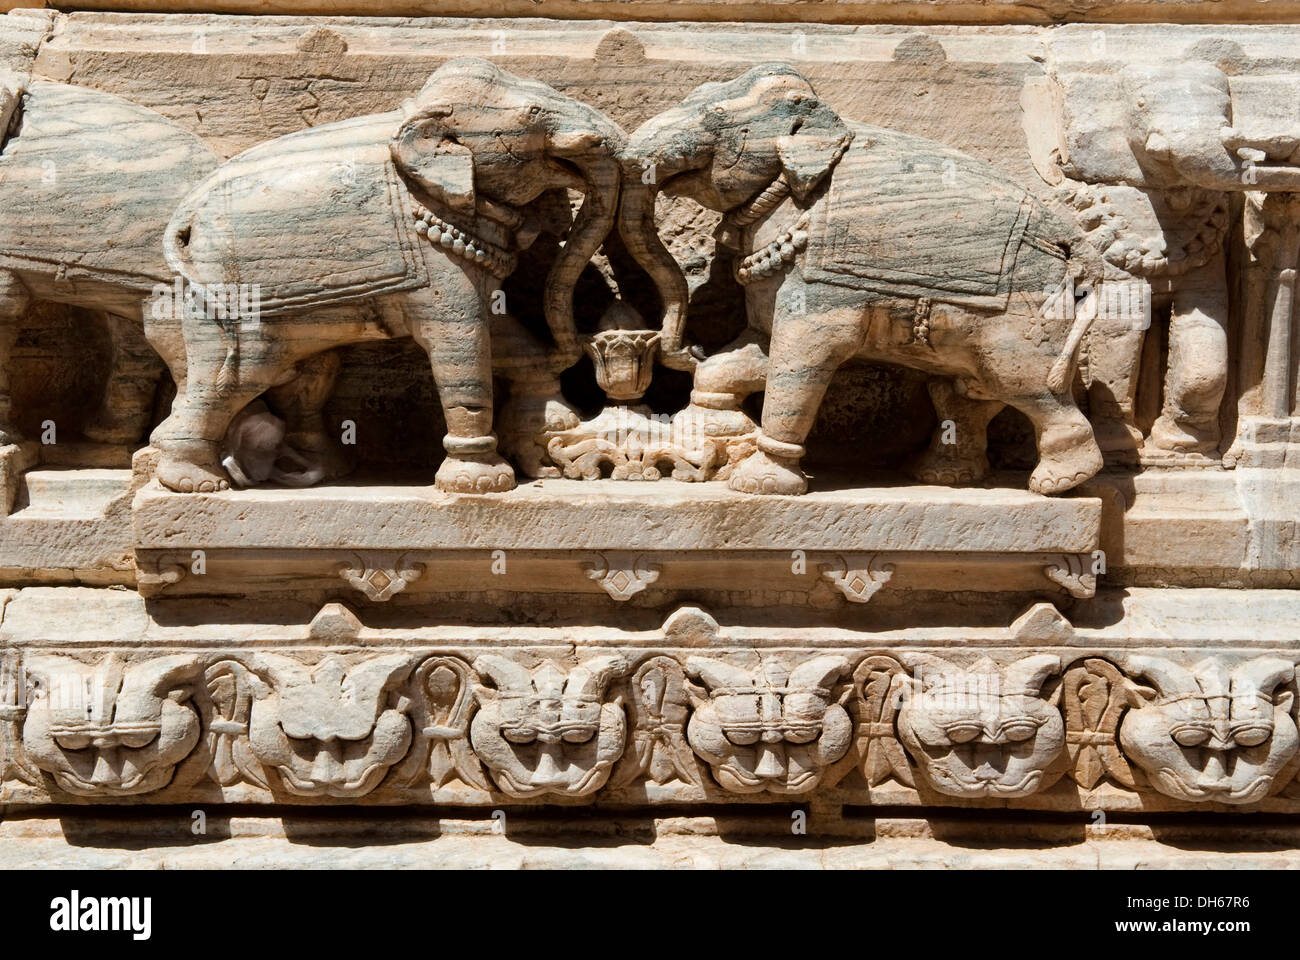 Elephant relief on the wall of the Jagdish Temple, Udaipur, Rajasthan, India, Asia Stock Photo